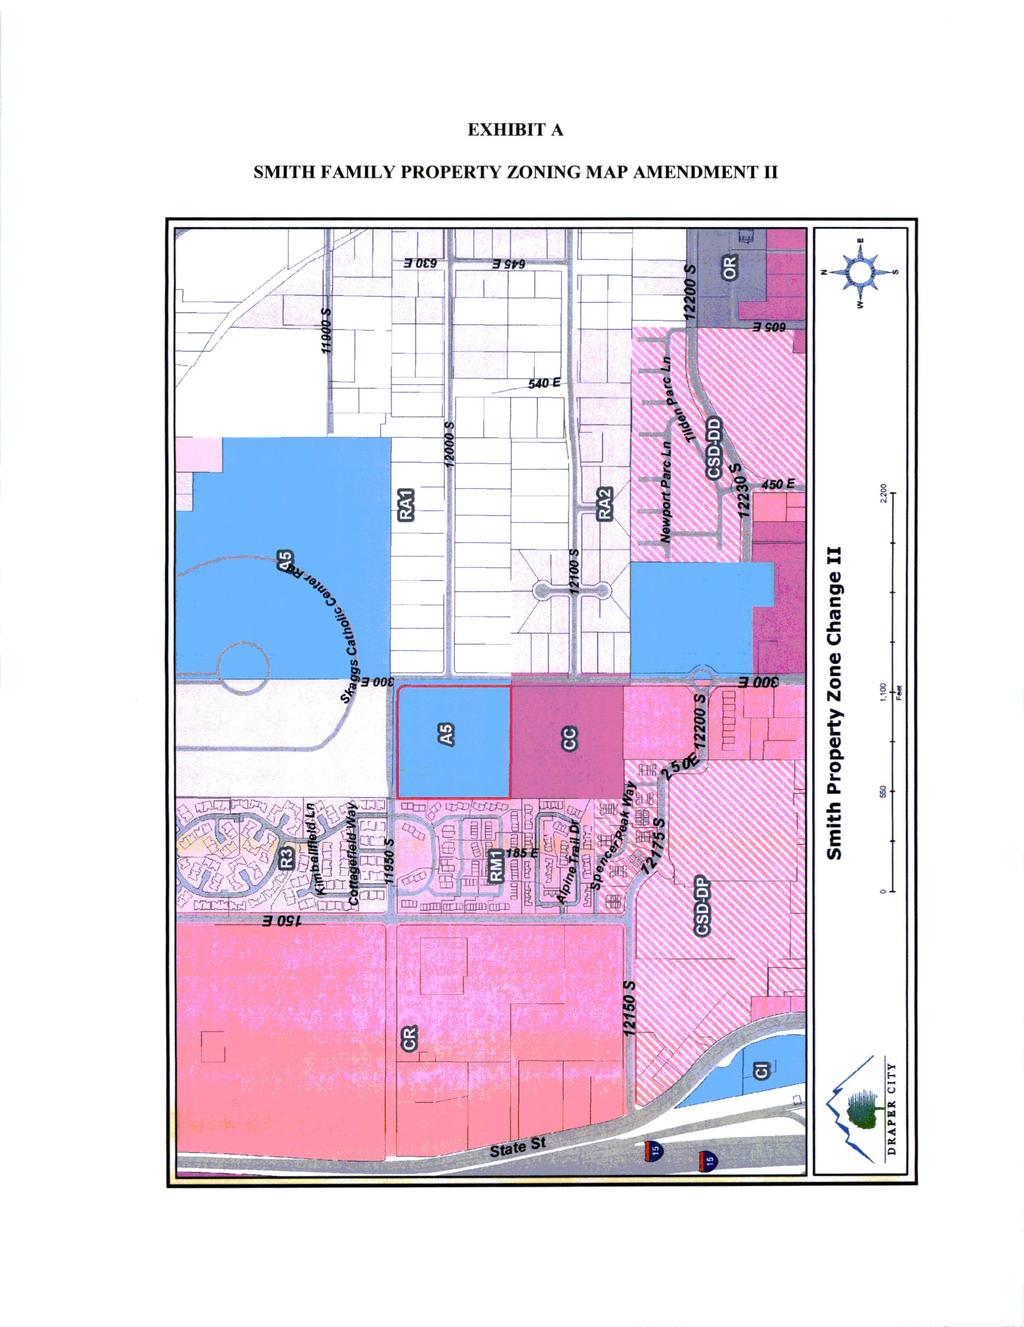 EXHIBIT A SMITH FAMILY PROPERTY ZONING MAP